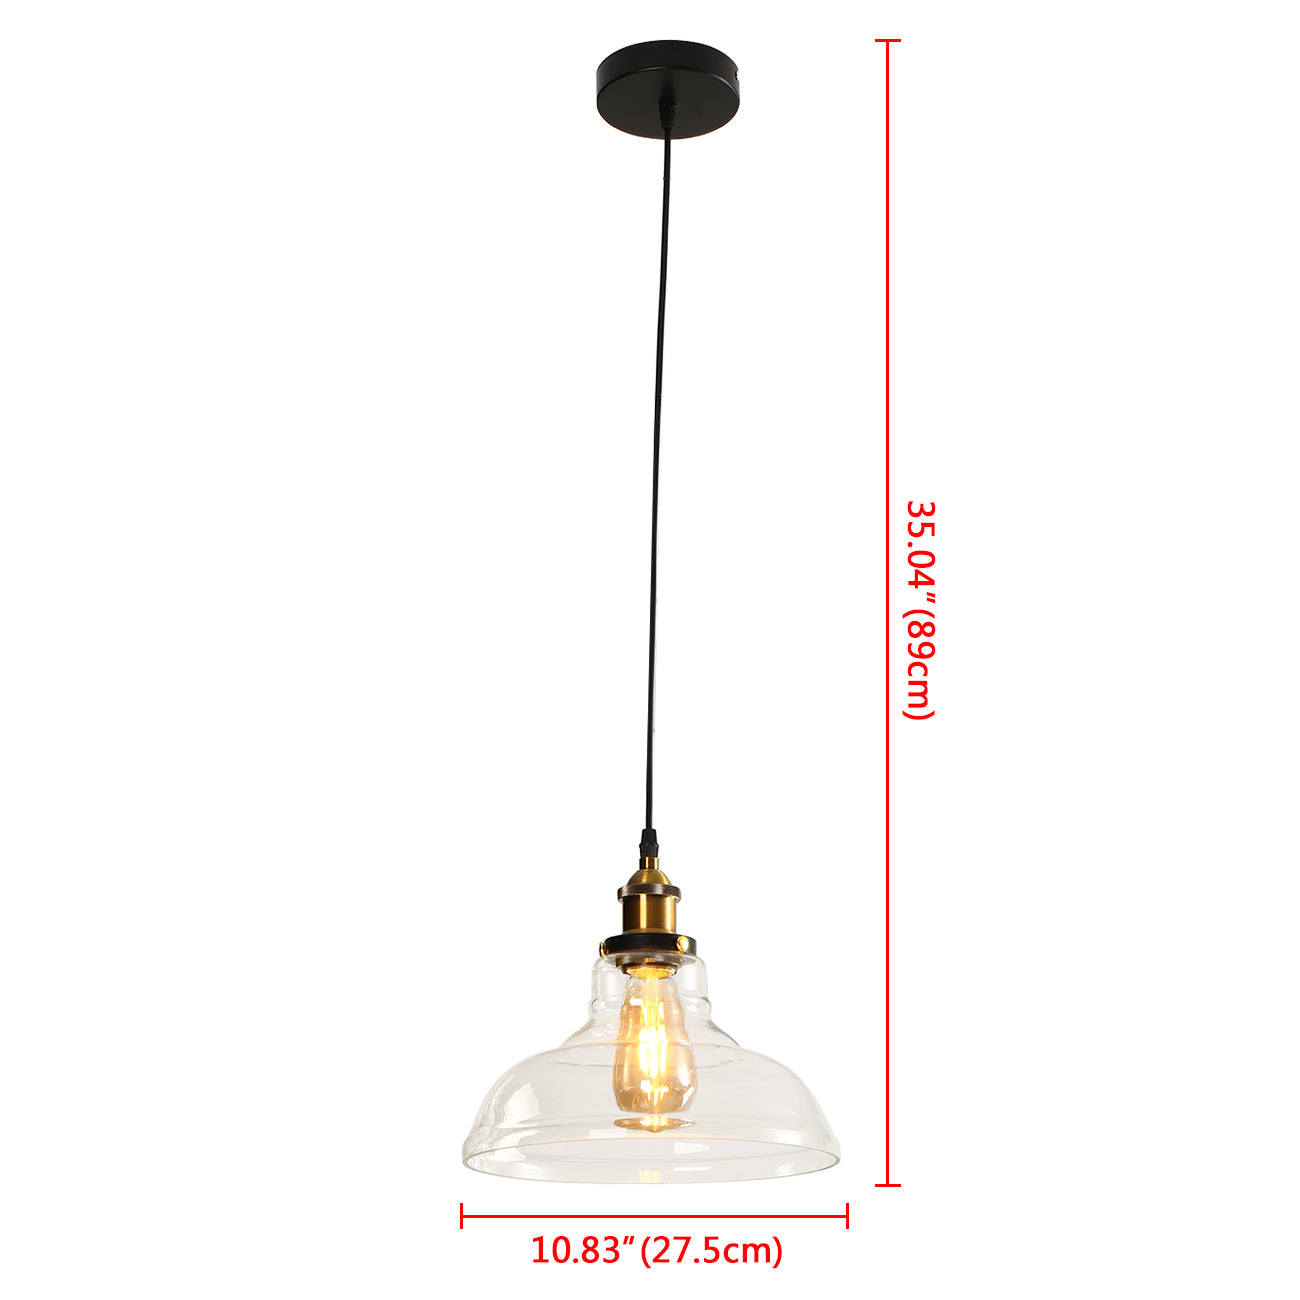 Retro Clear Glass Ceiling Pendant Industrial Light Shade Chandelier with Bulb hello-826